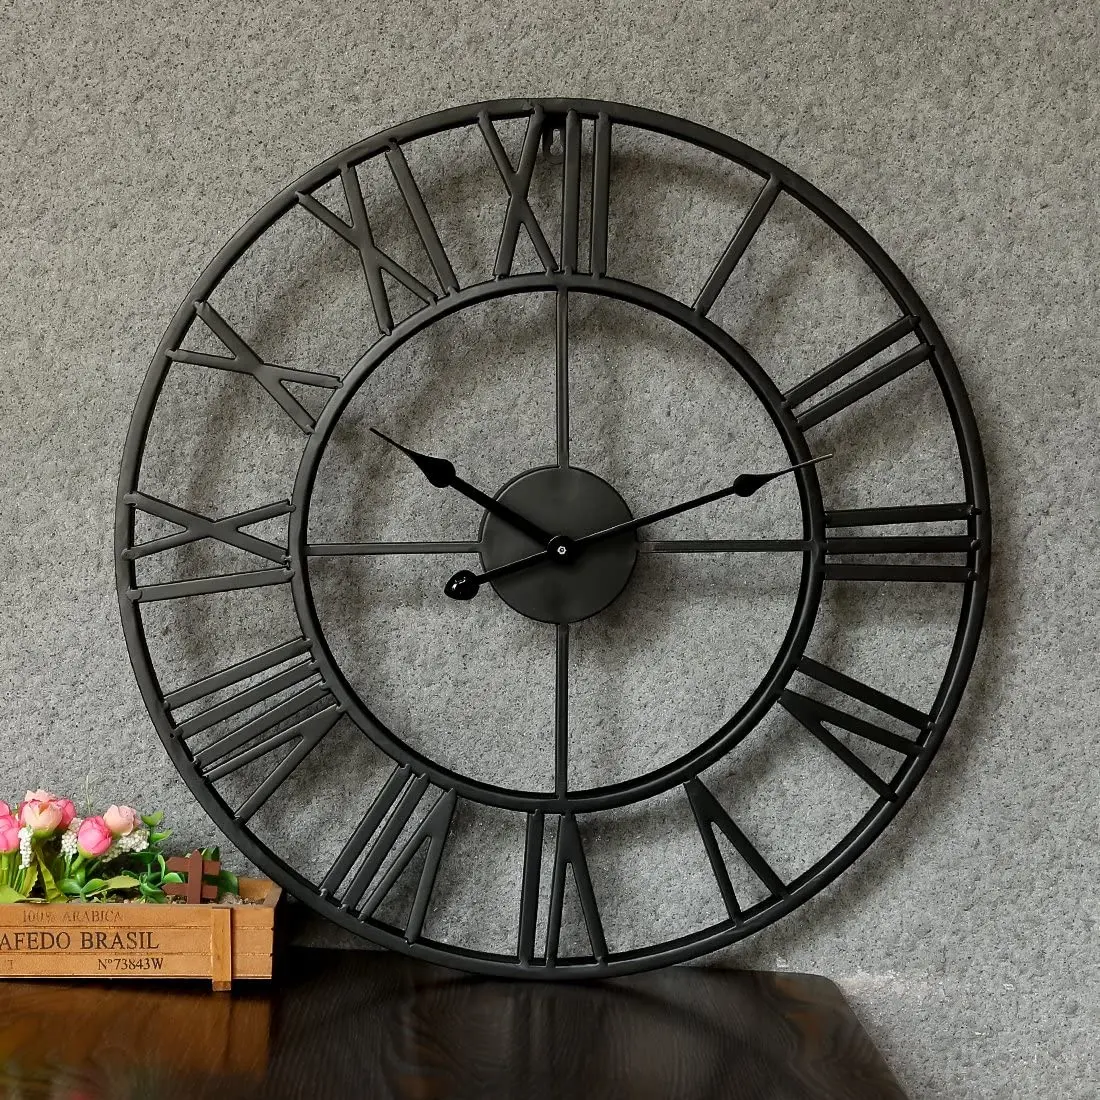 24 inch moden classical interior metal frame art clock, European industrial old large iron wall clock